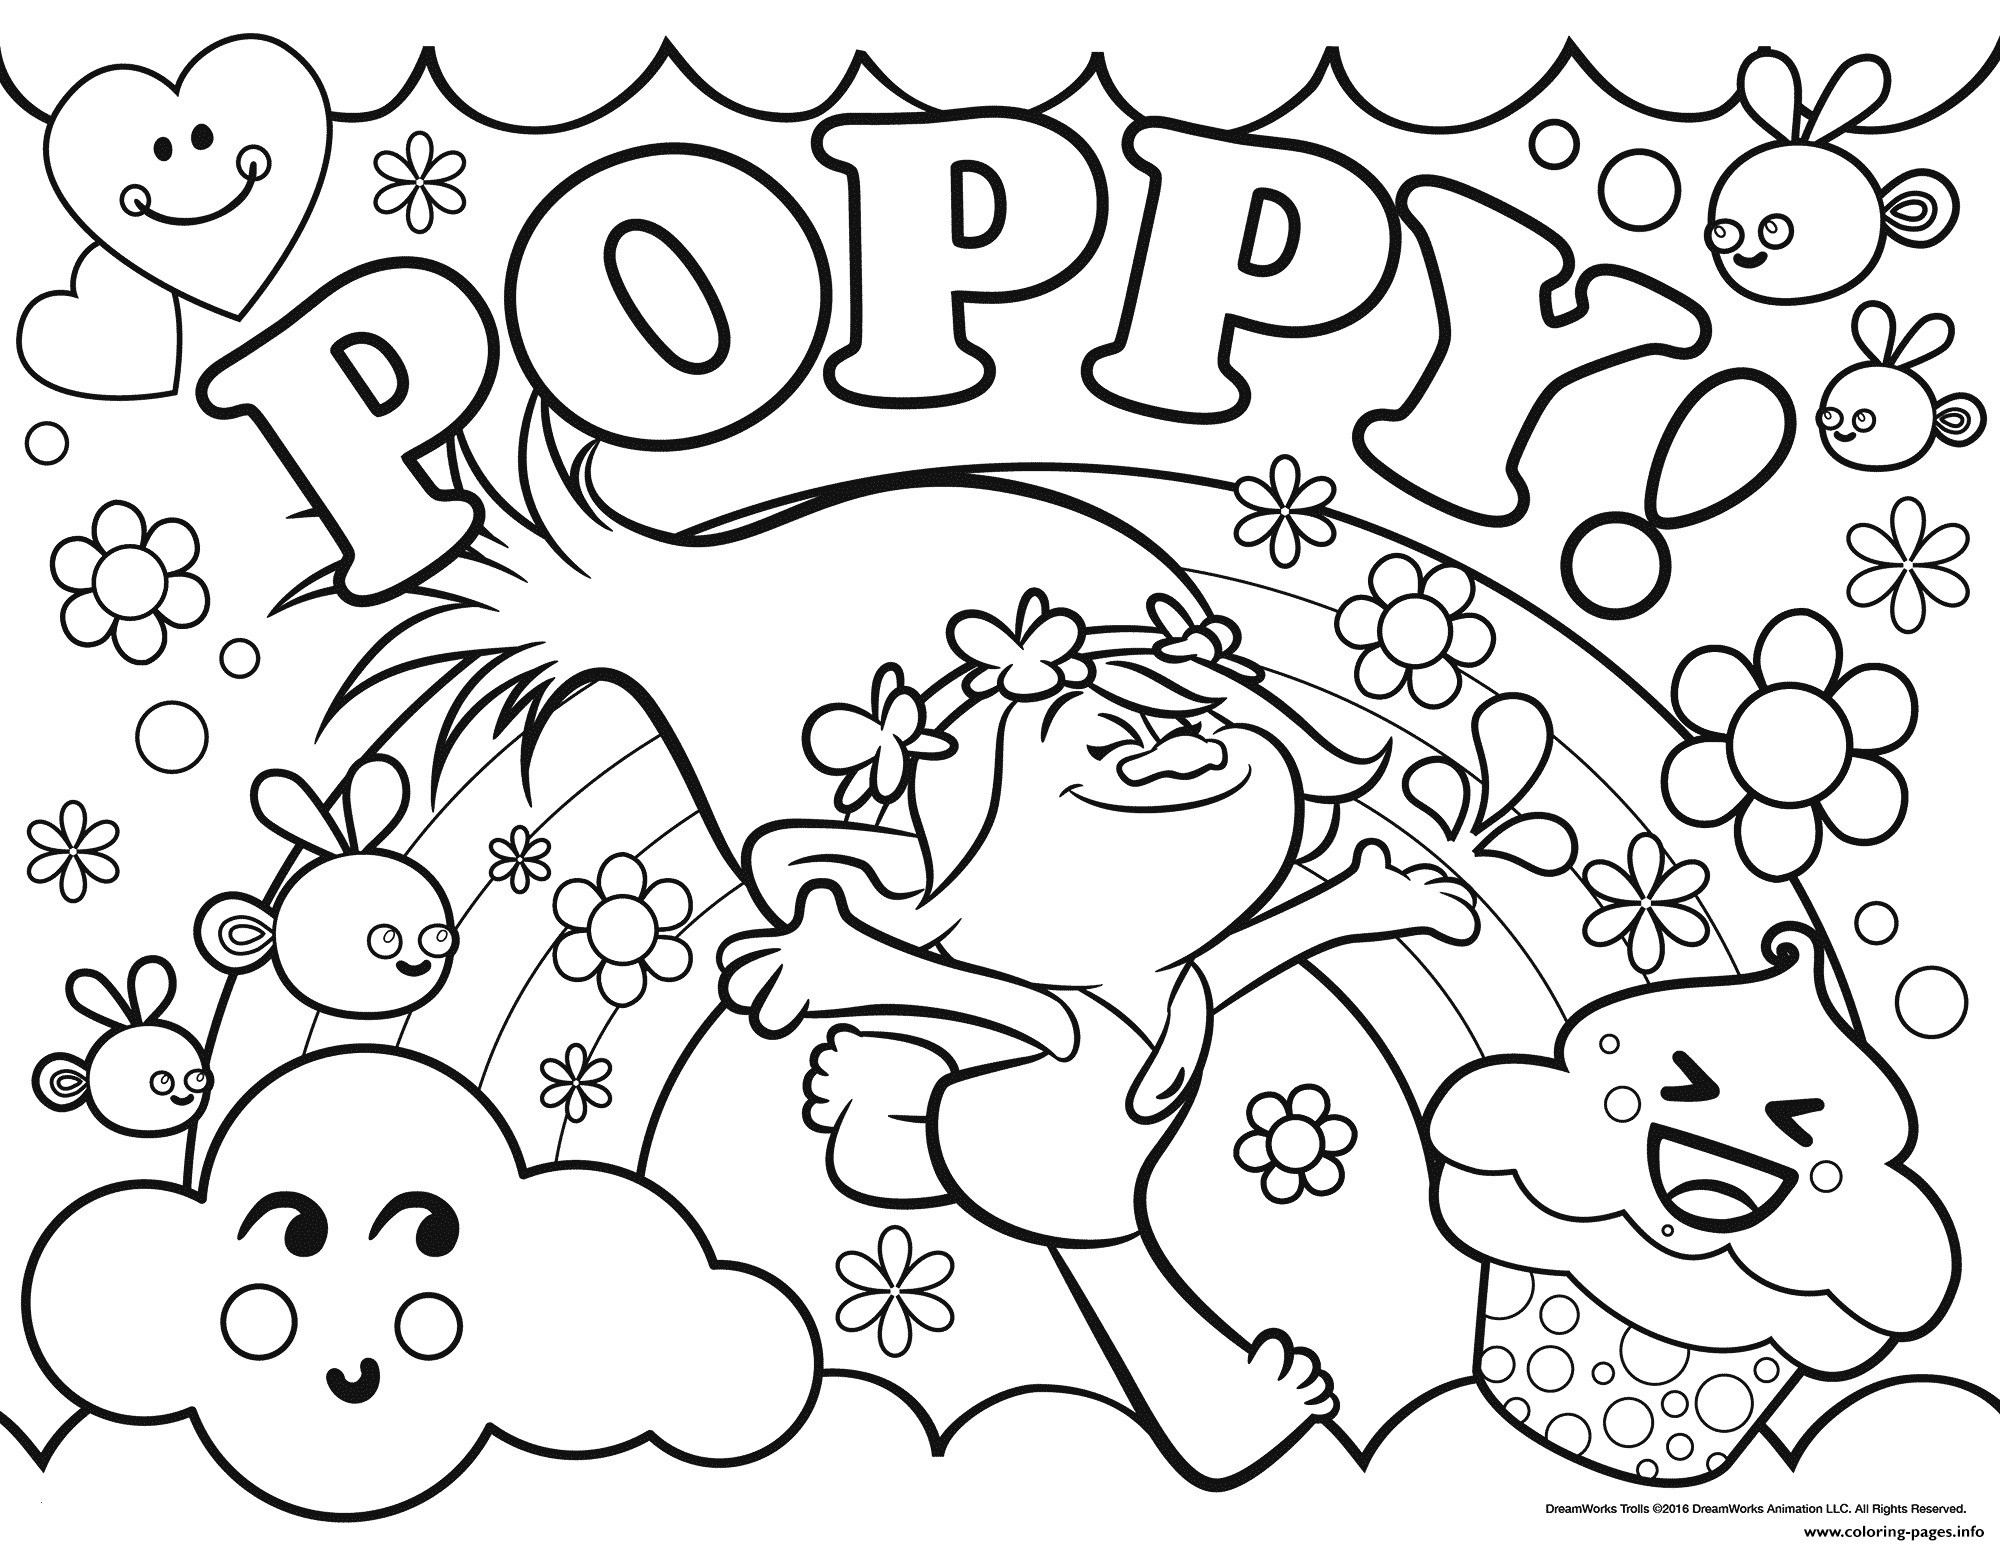 Poppy Trolls Colouring In Pages